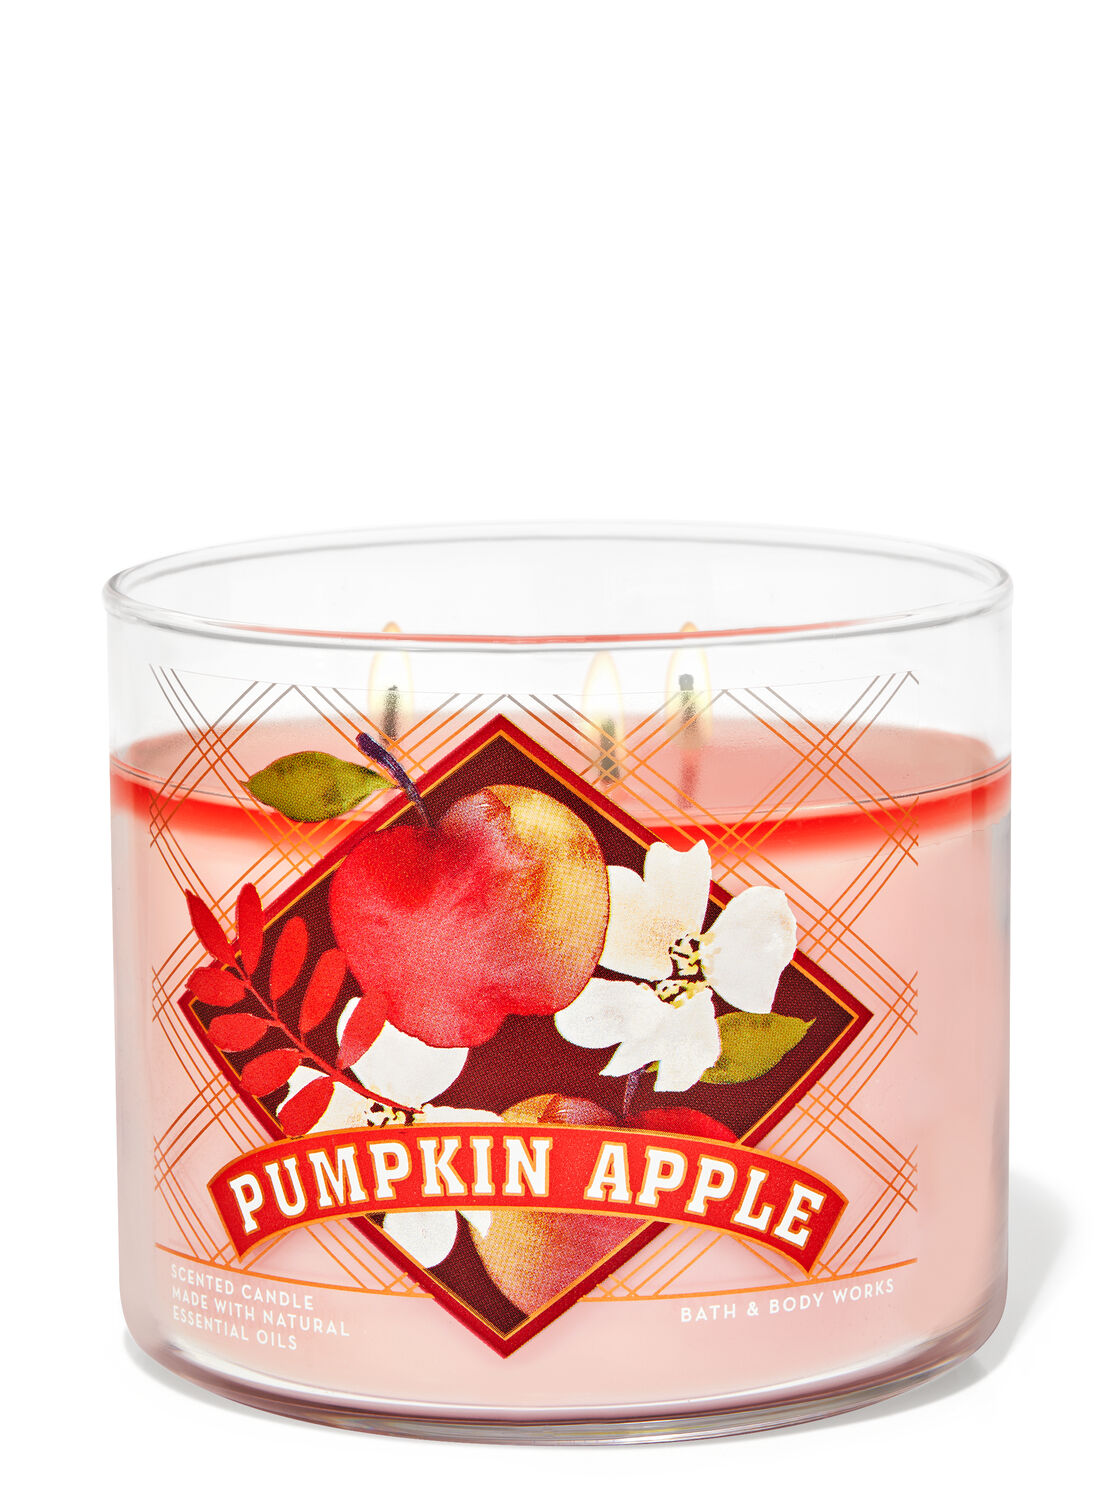 Bath & Body Works PUMPKIN APPLE 3-Wick Scented Large Candle 14.5 oz 